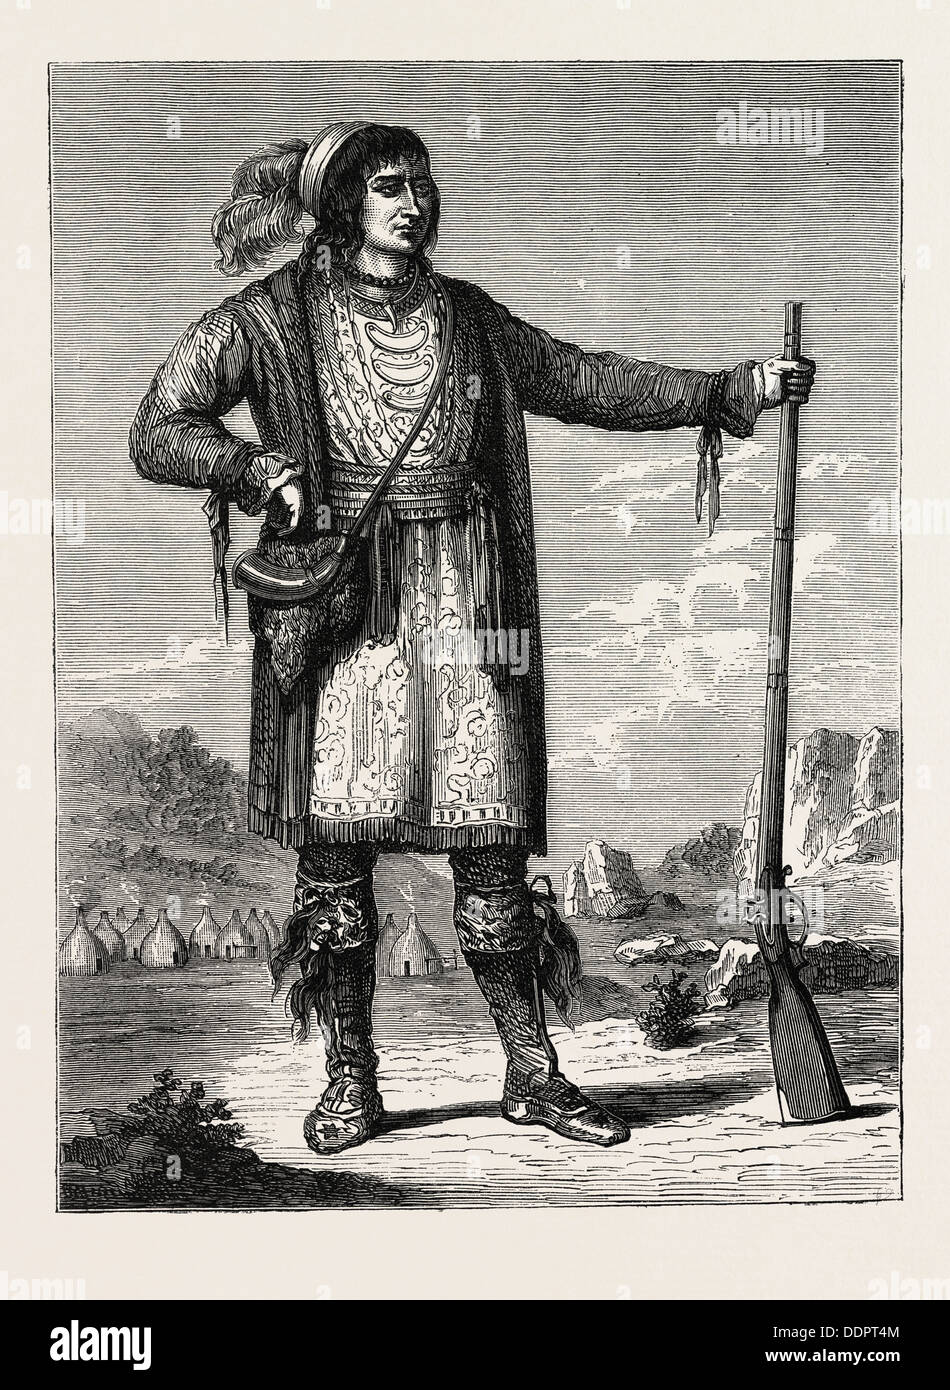 OSCEOLA, CHIEF OF THE SEMINOLES. From Catlin's North American Indians.US, USA, 1870s engraving Stock Photo